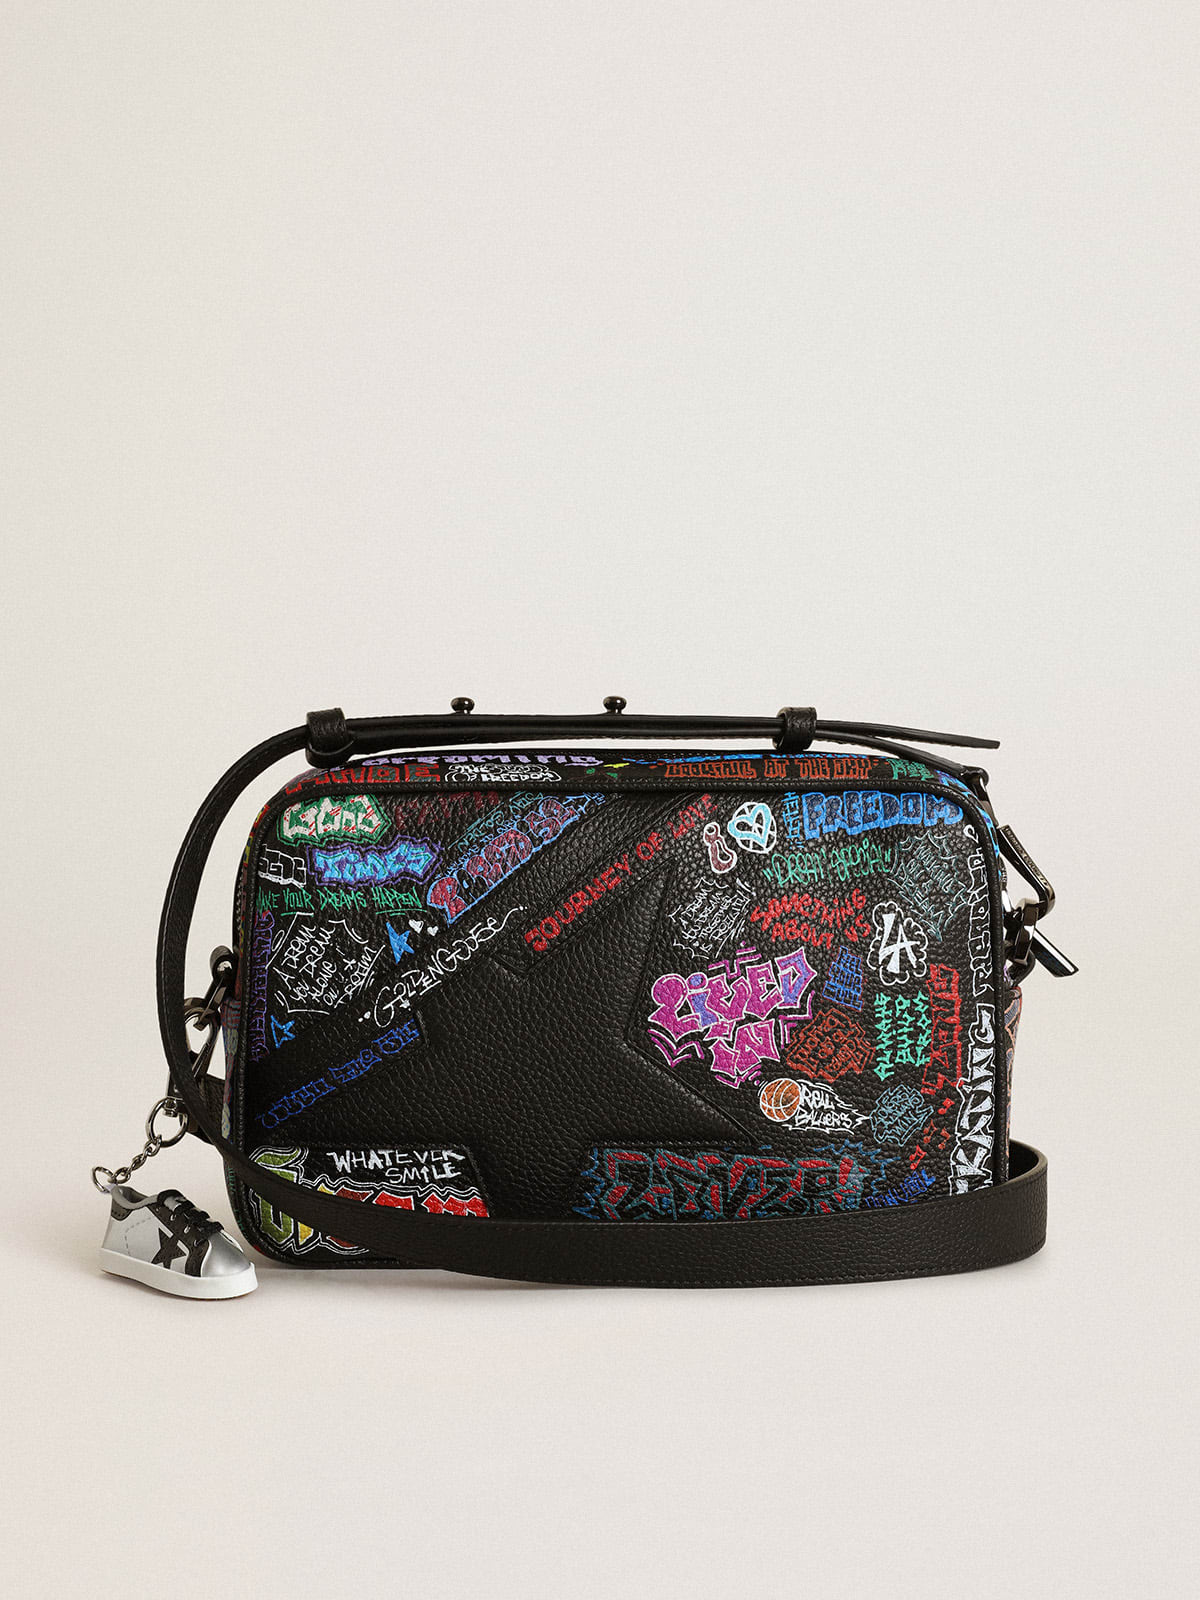 Star Bag in black hammered leather with black leather star and all-over multicolored print